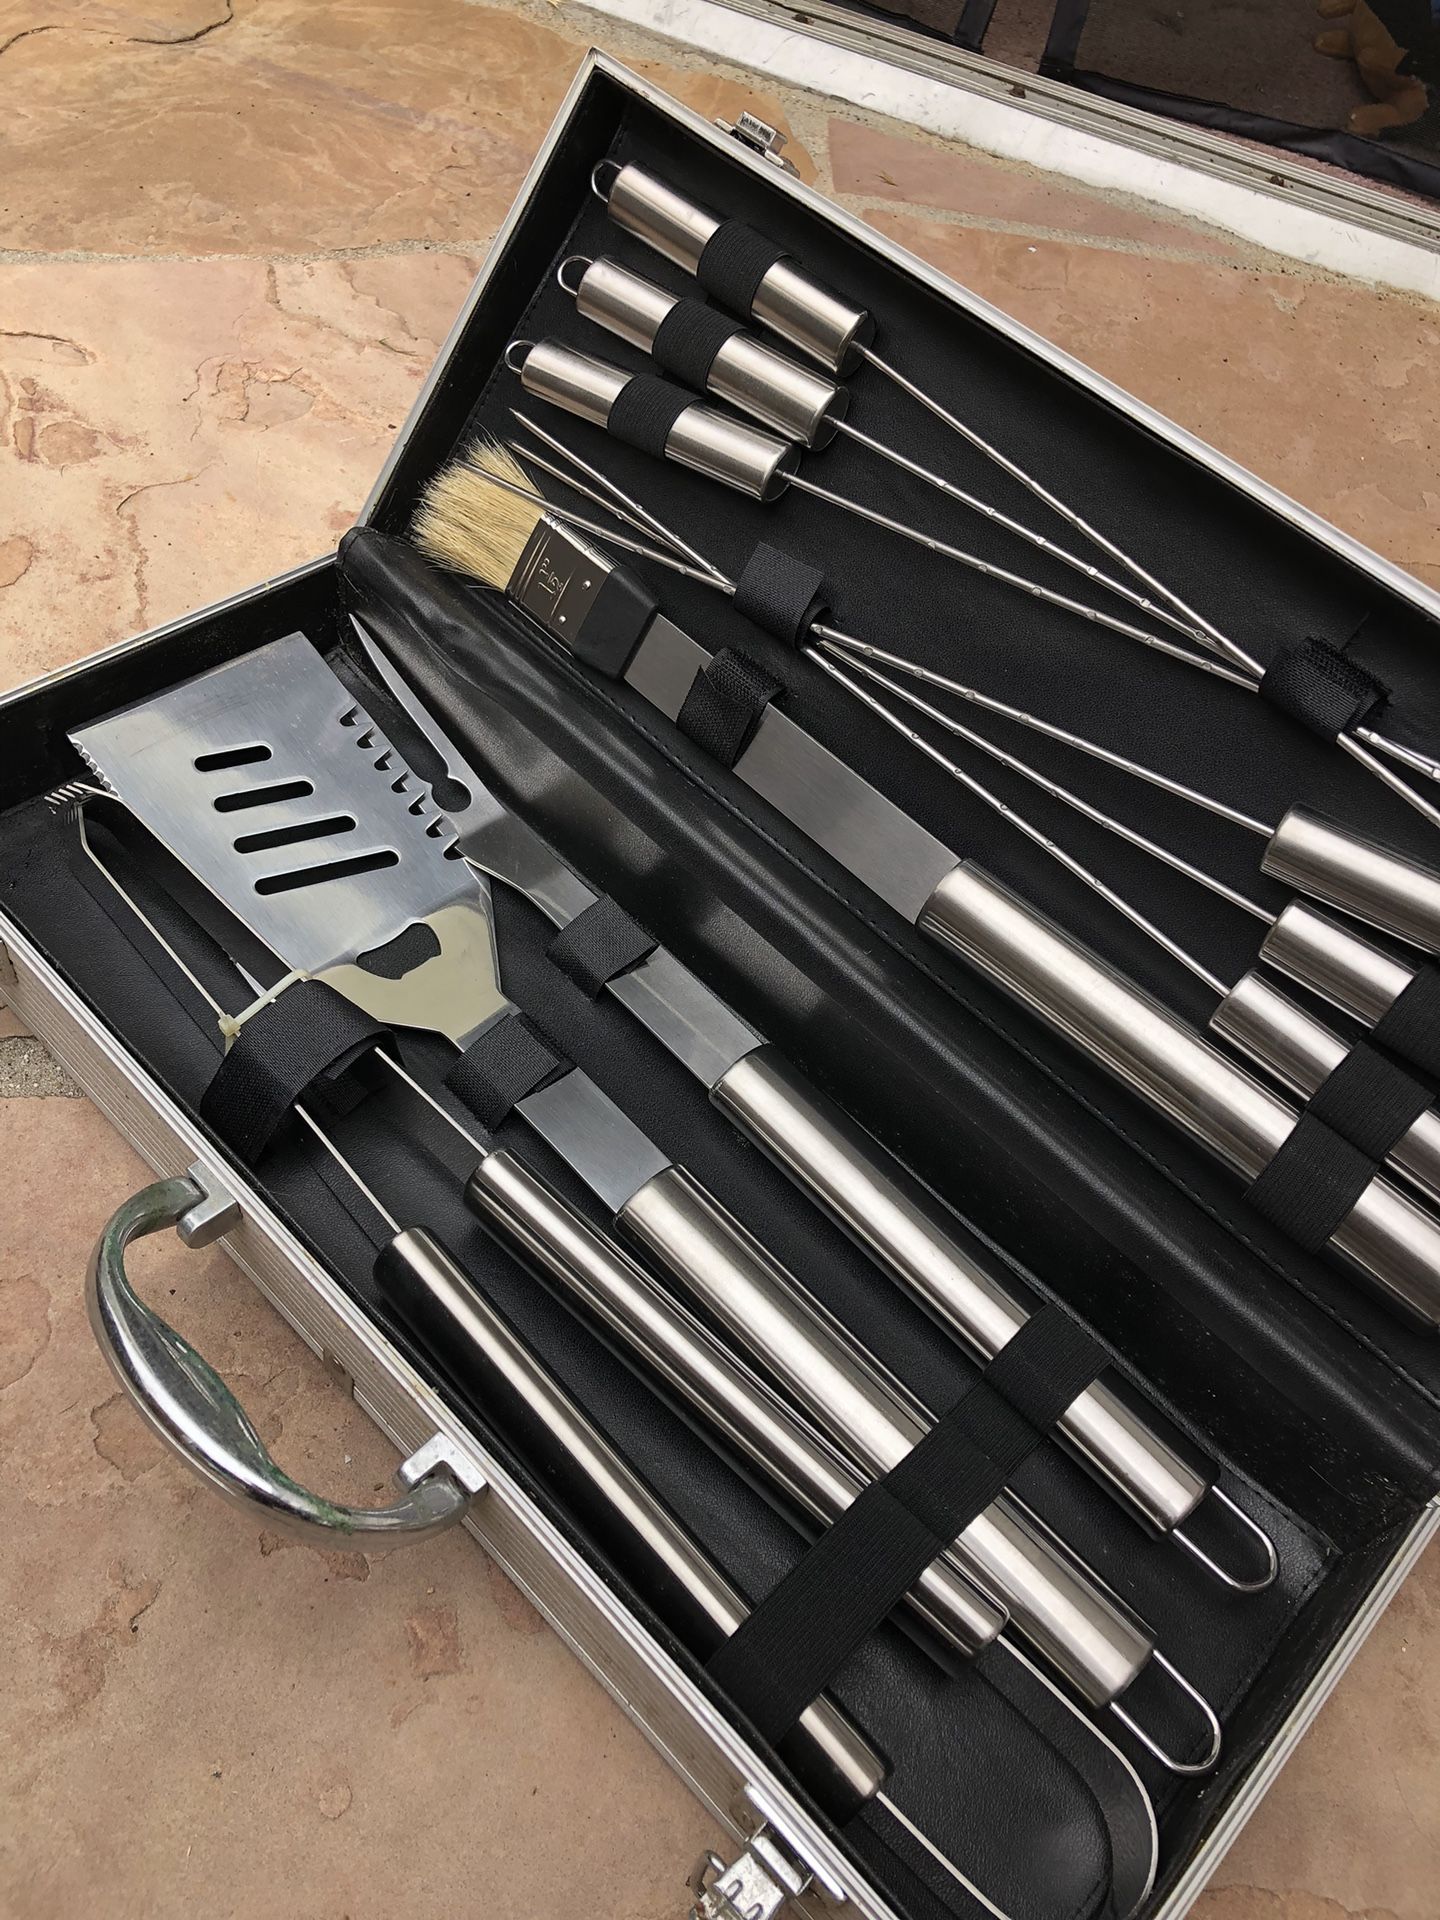 Fourth Of July New Backyard Patio BBQ Grill Utensils Set Tongs Grilling Steak Skewers Brush Spatula Fathers Day Gift Birthday Present 